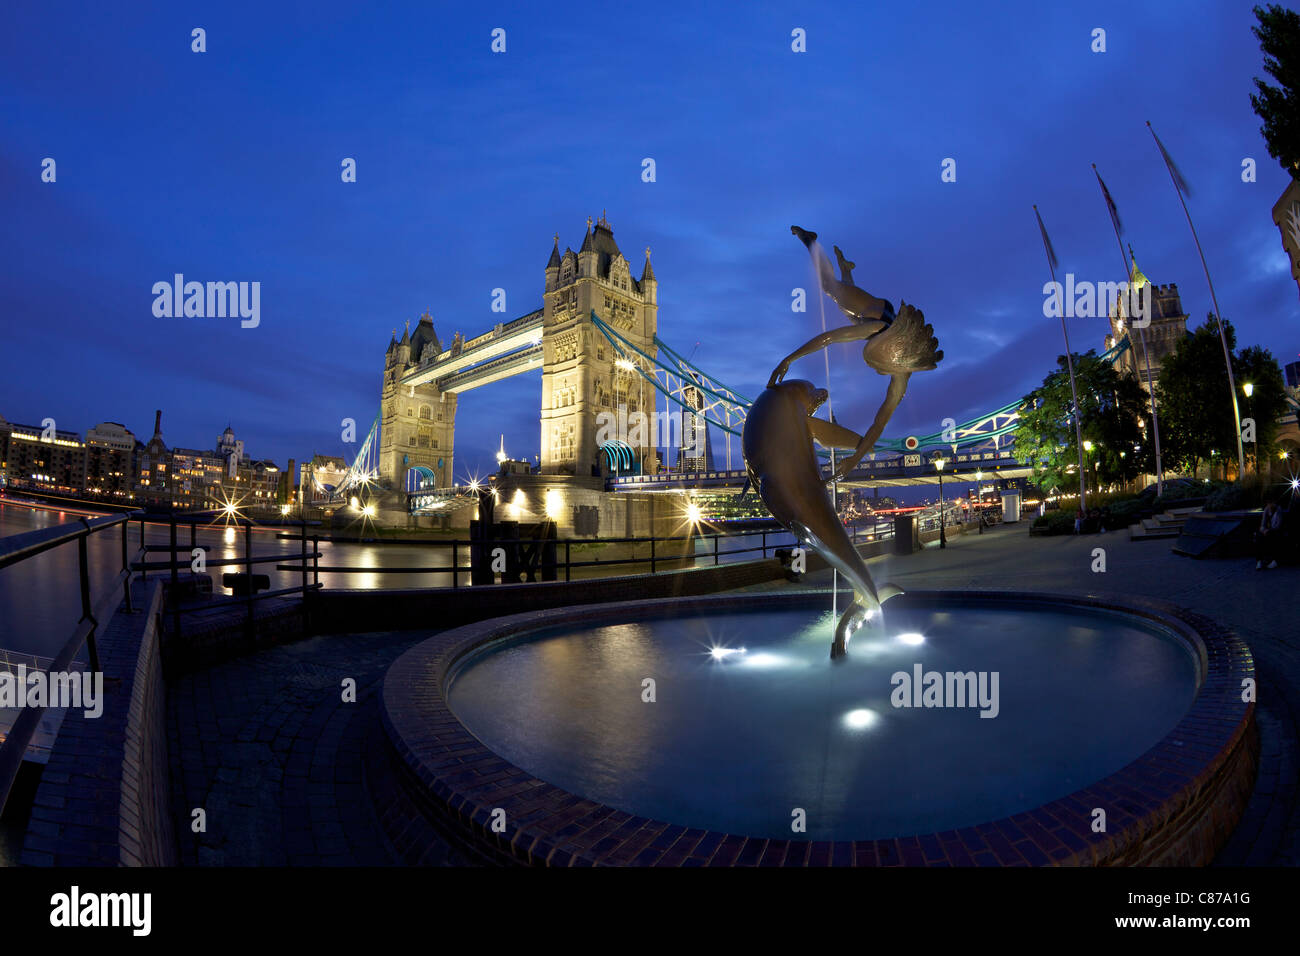 Girl With A Dolphin, statue by David Wynne, illuminated at night in front of Tower Bridge,  London, England, UK, United Kingdom, Stock Photo